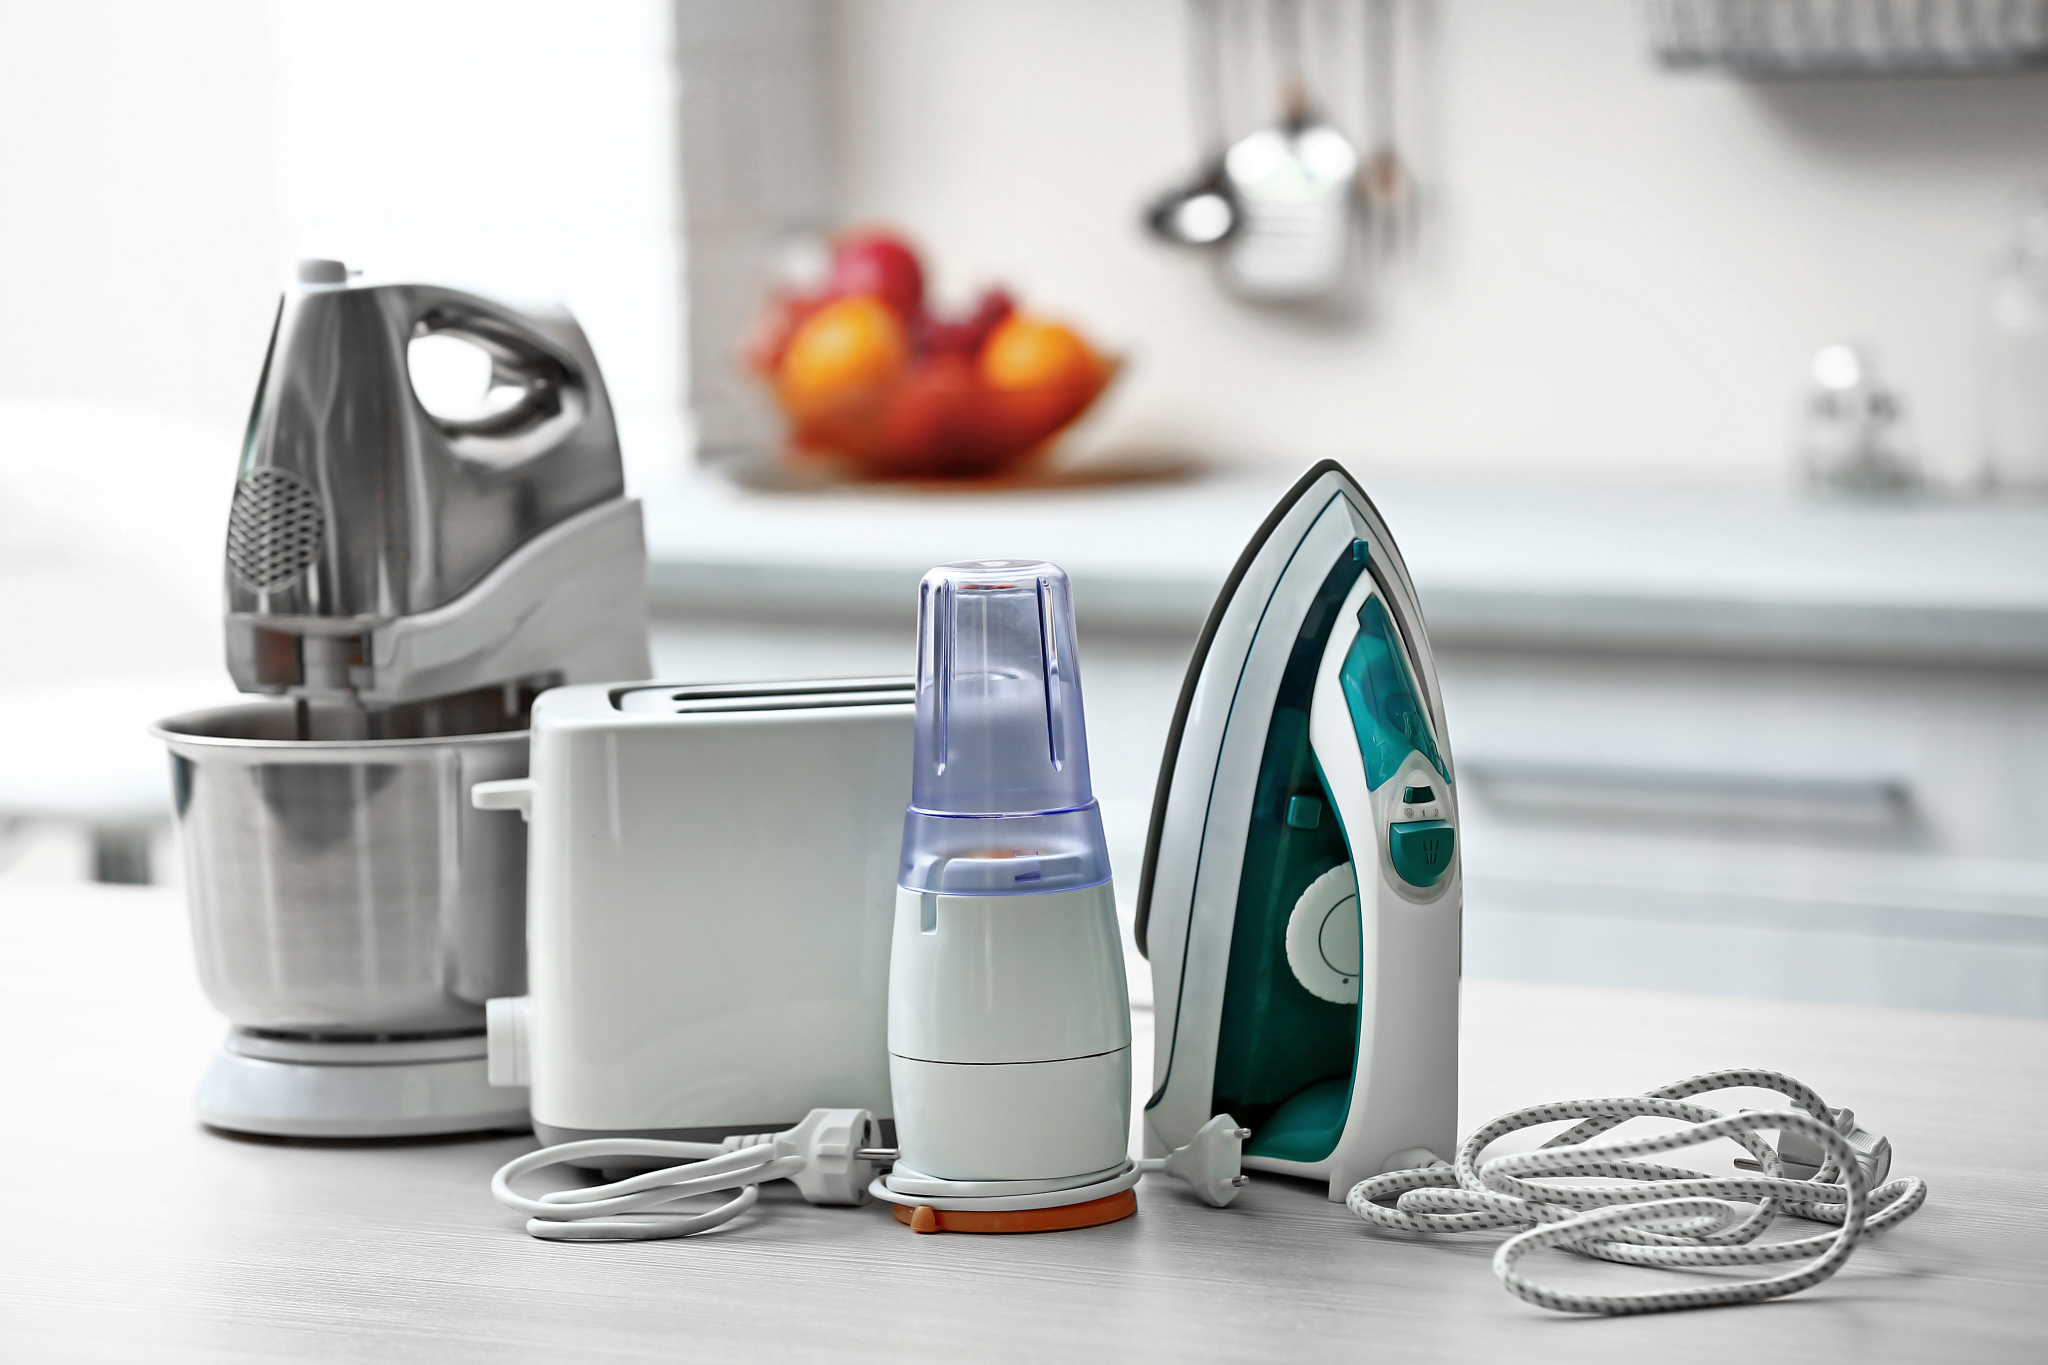 A kitchen counter with an Iron, Toaster, Mixer, and a onion slicer.